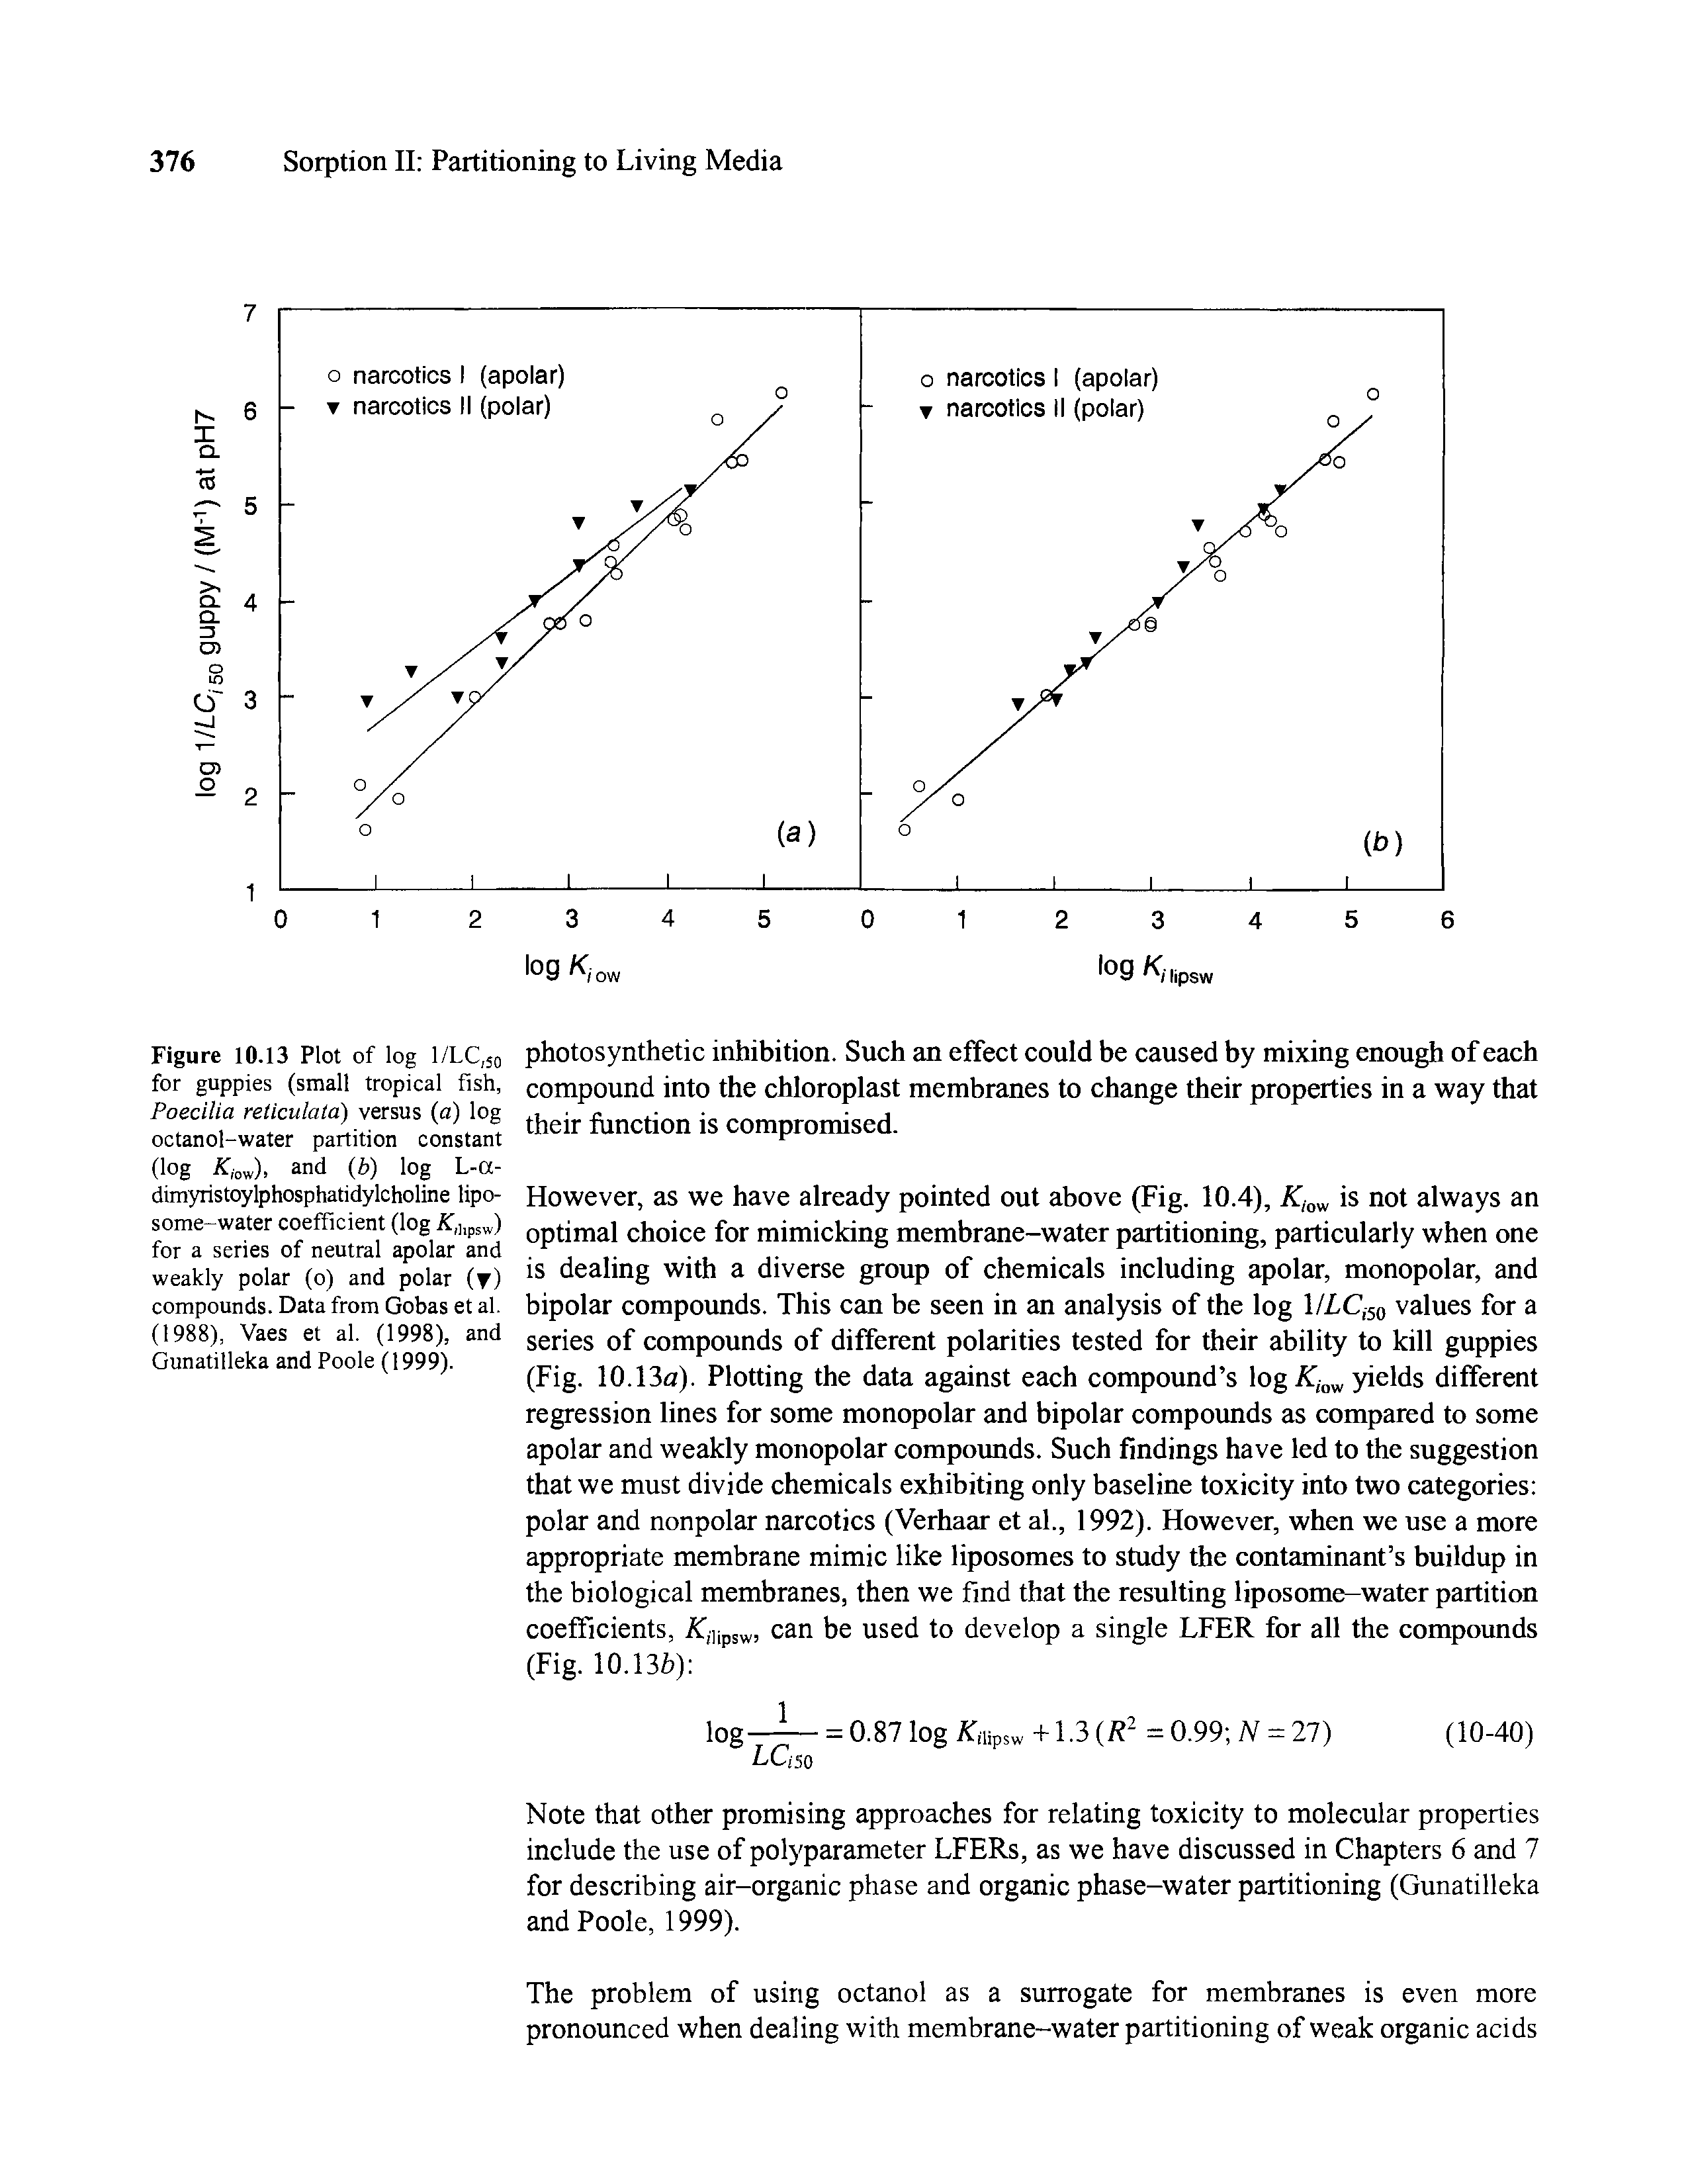 Figure 10.13 Plot of log 1/LC,S0 for guppies (small tropical fish, Poecilia reticulata) versus (a) log octanol-water partition constant (log A ,ow), and (b) log L-a-dimyristoylphosphatidylcholine liposome-water coefficient (log A)]ipsw) for a series of neutral apolar and weakly polar (o) and polar (t) compounds. Data from Gobas et al. (1988), Vaes et al. (1998), and Gunatilleka and Poole (1999).